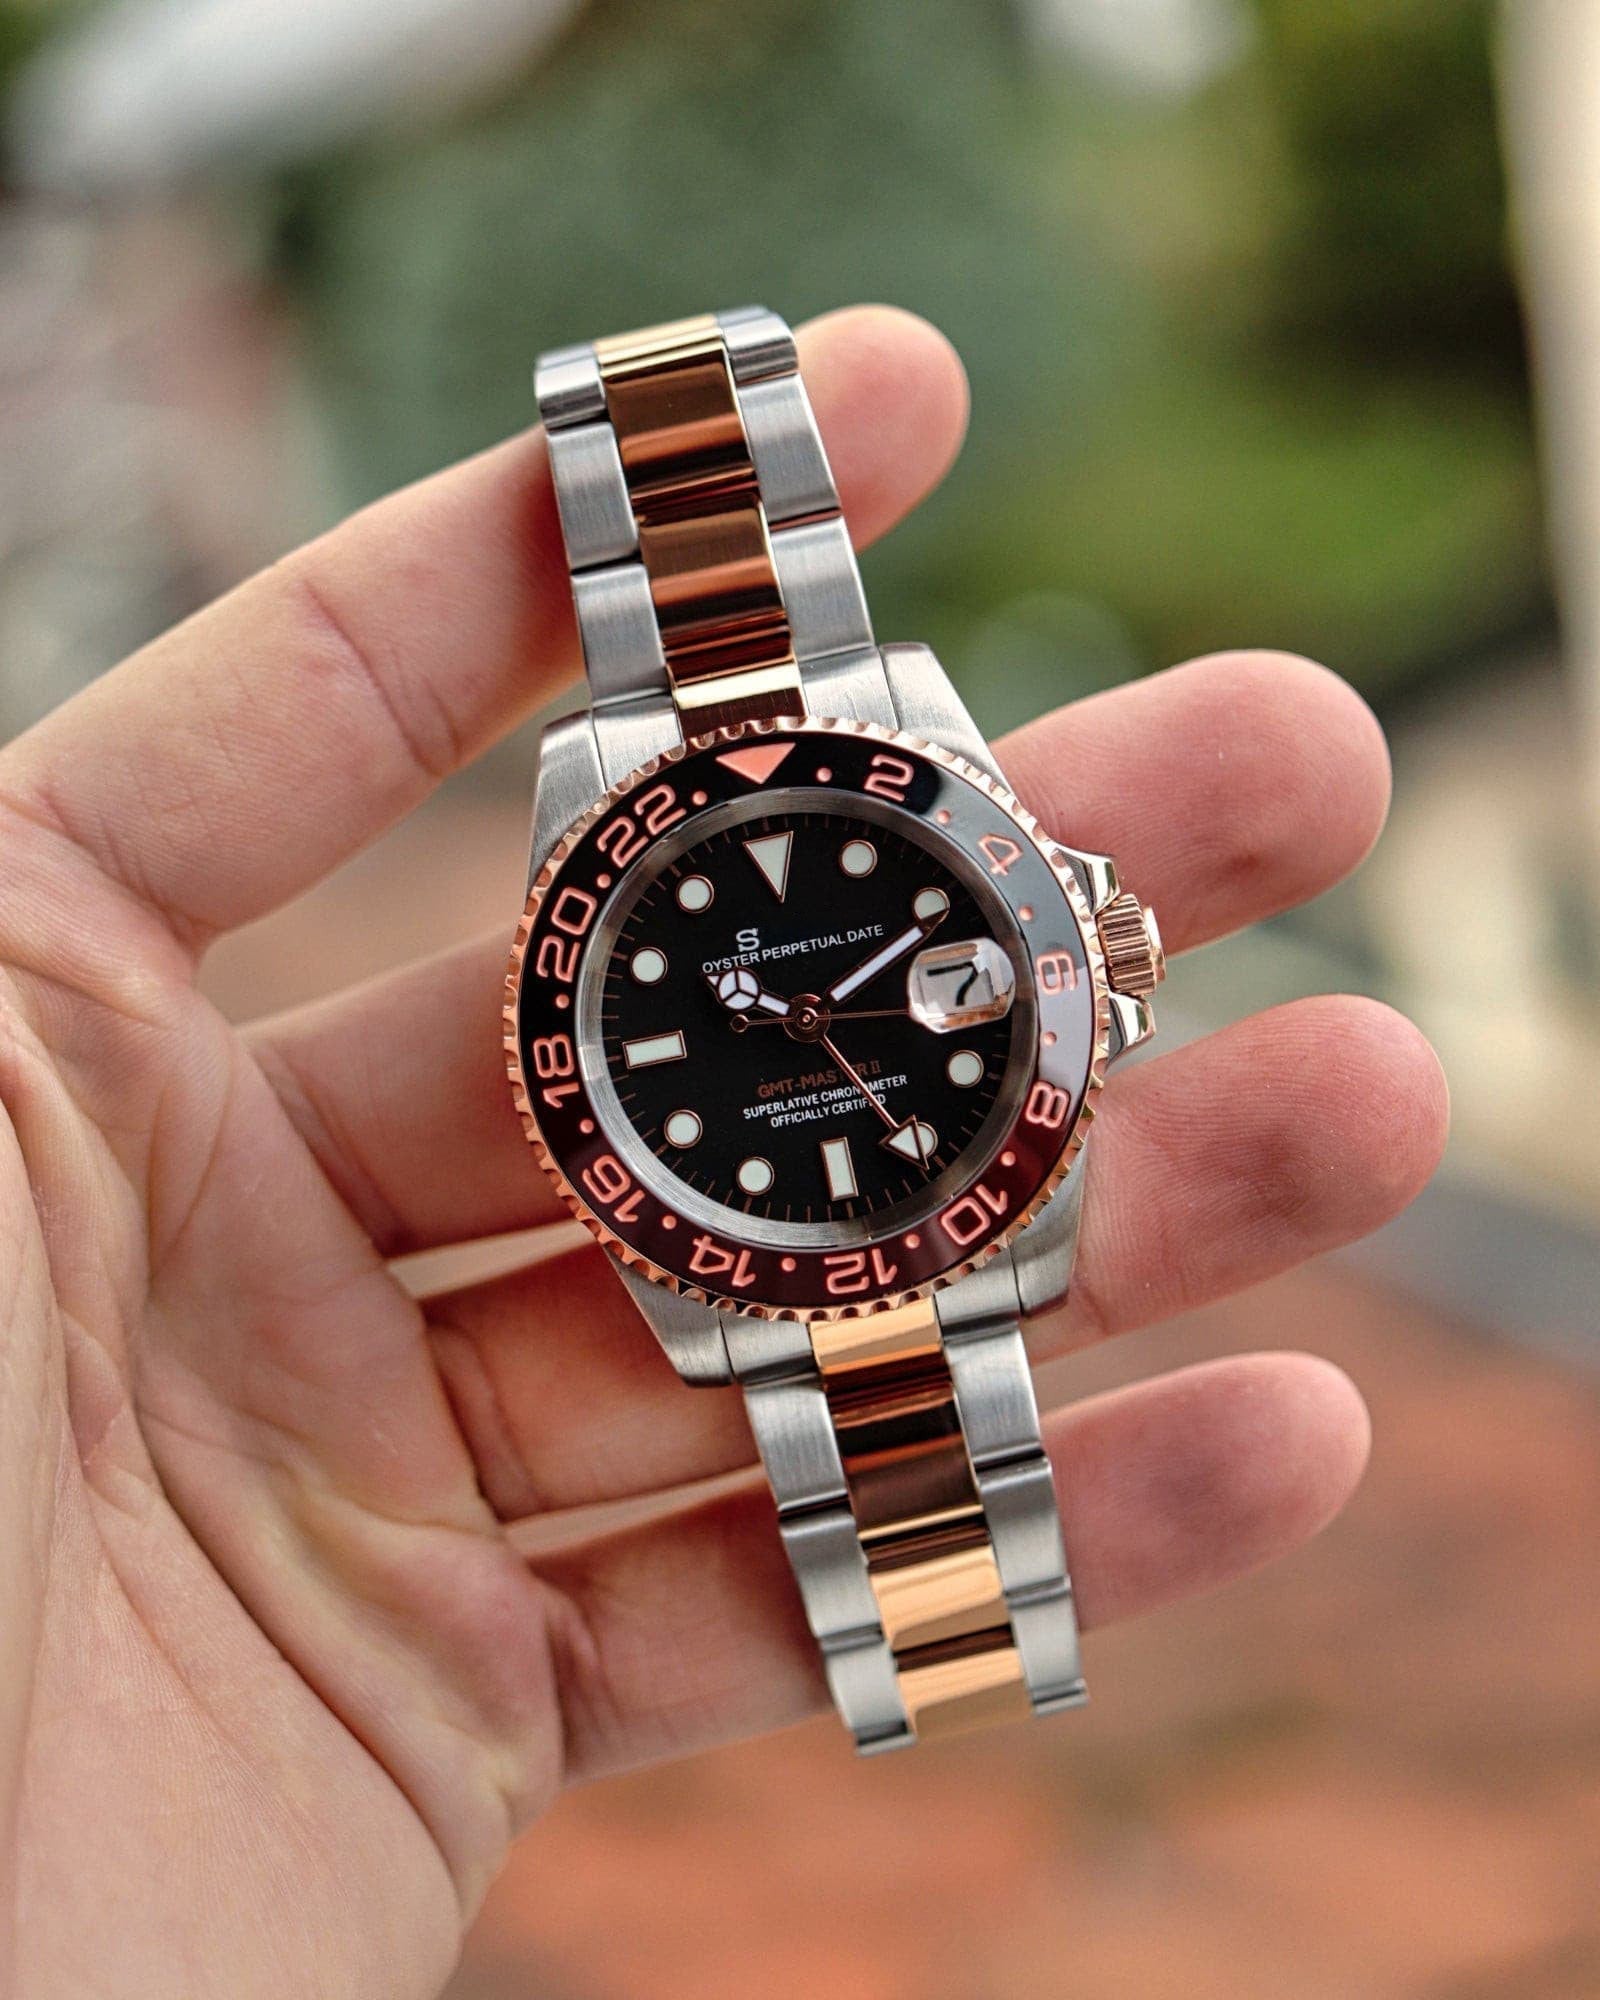 Seiko Mod GMT Rootbeer from Inarimod for 379.90